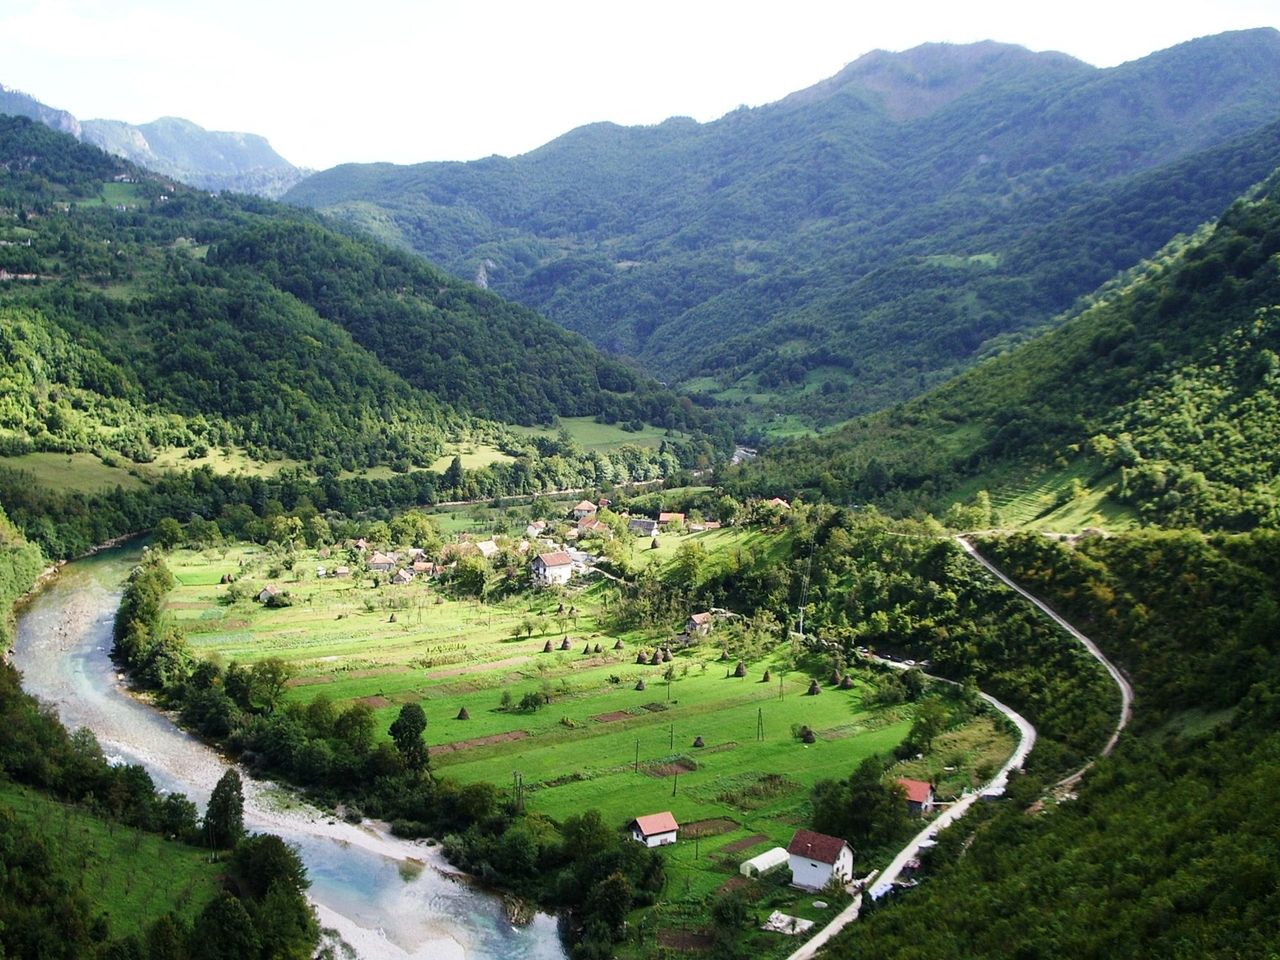 Uncover Konjic: Explore the Best of Bosnia and Herzegovina